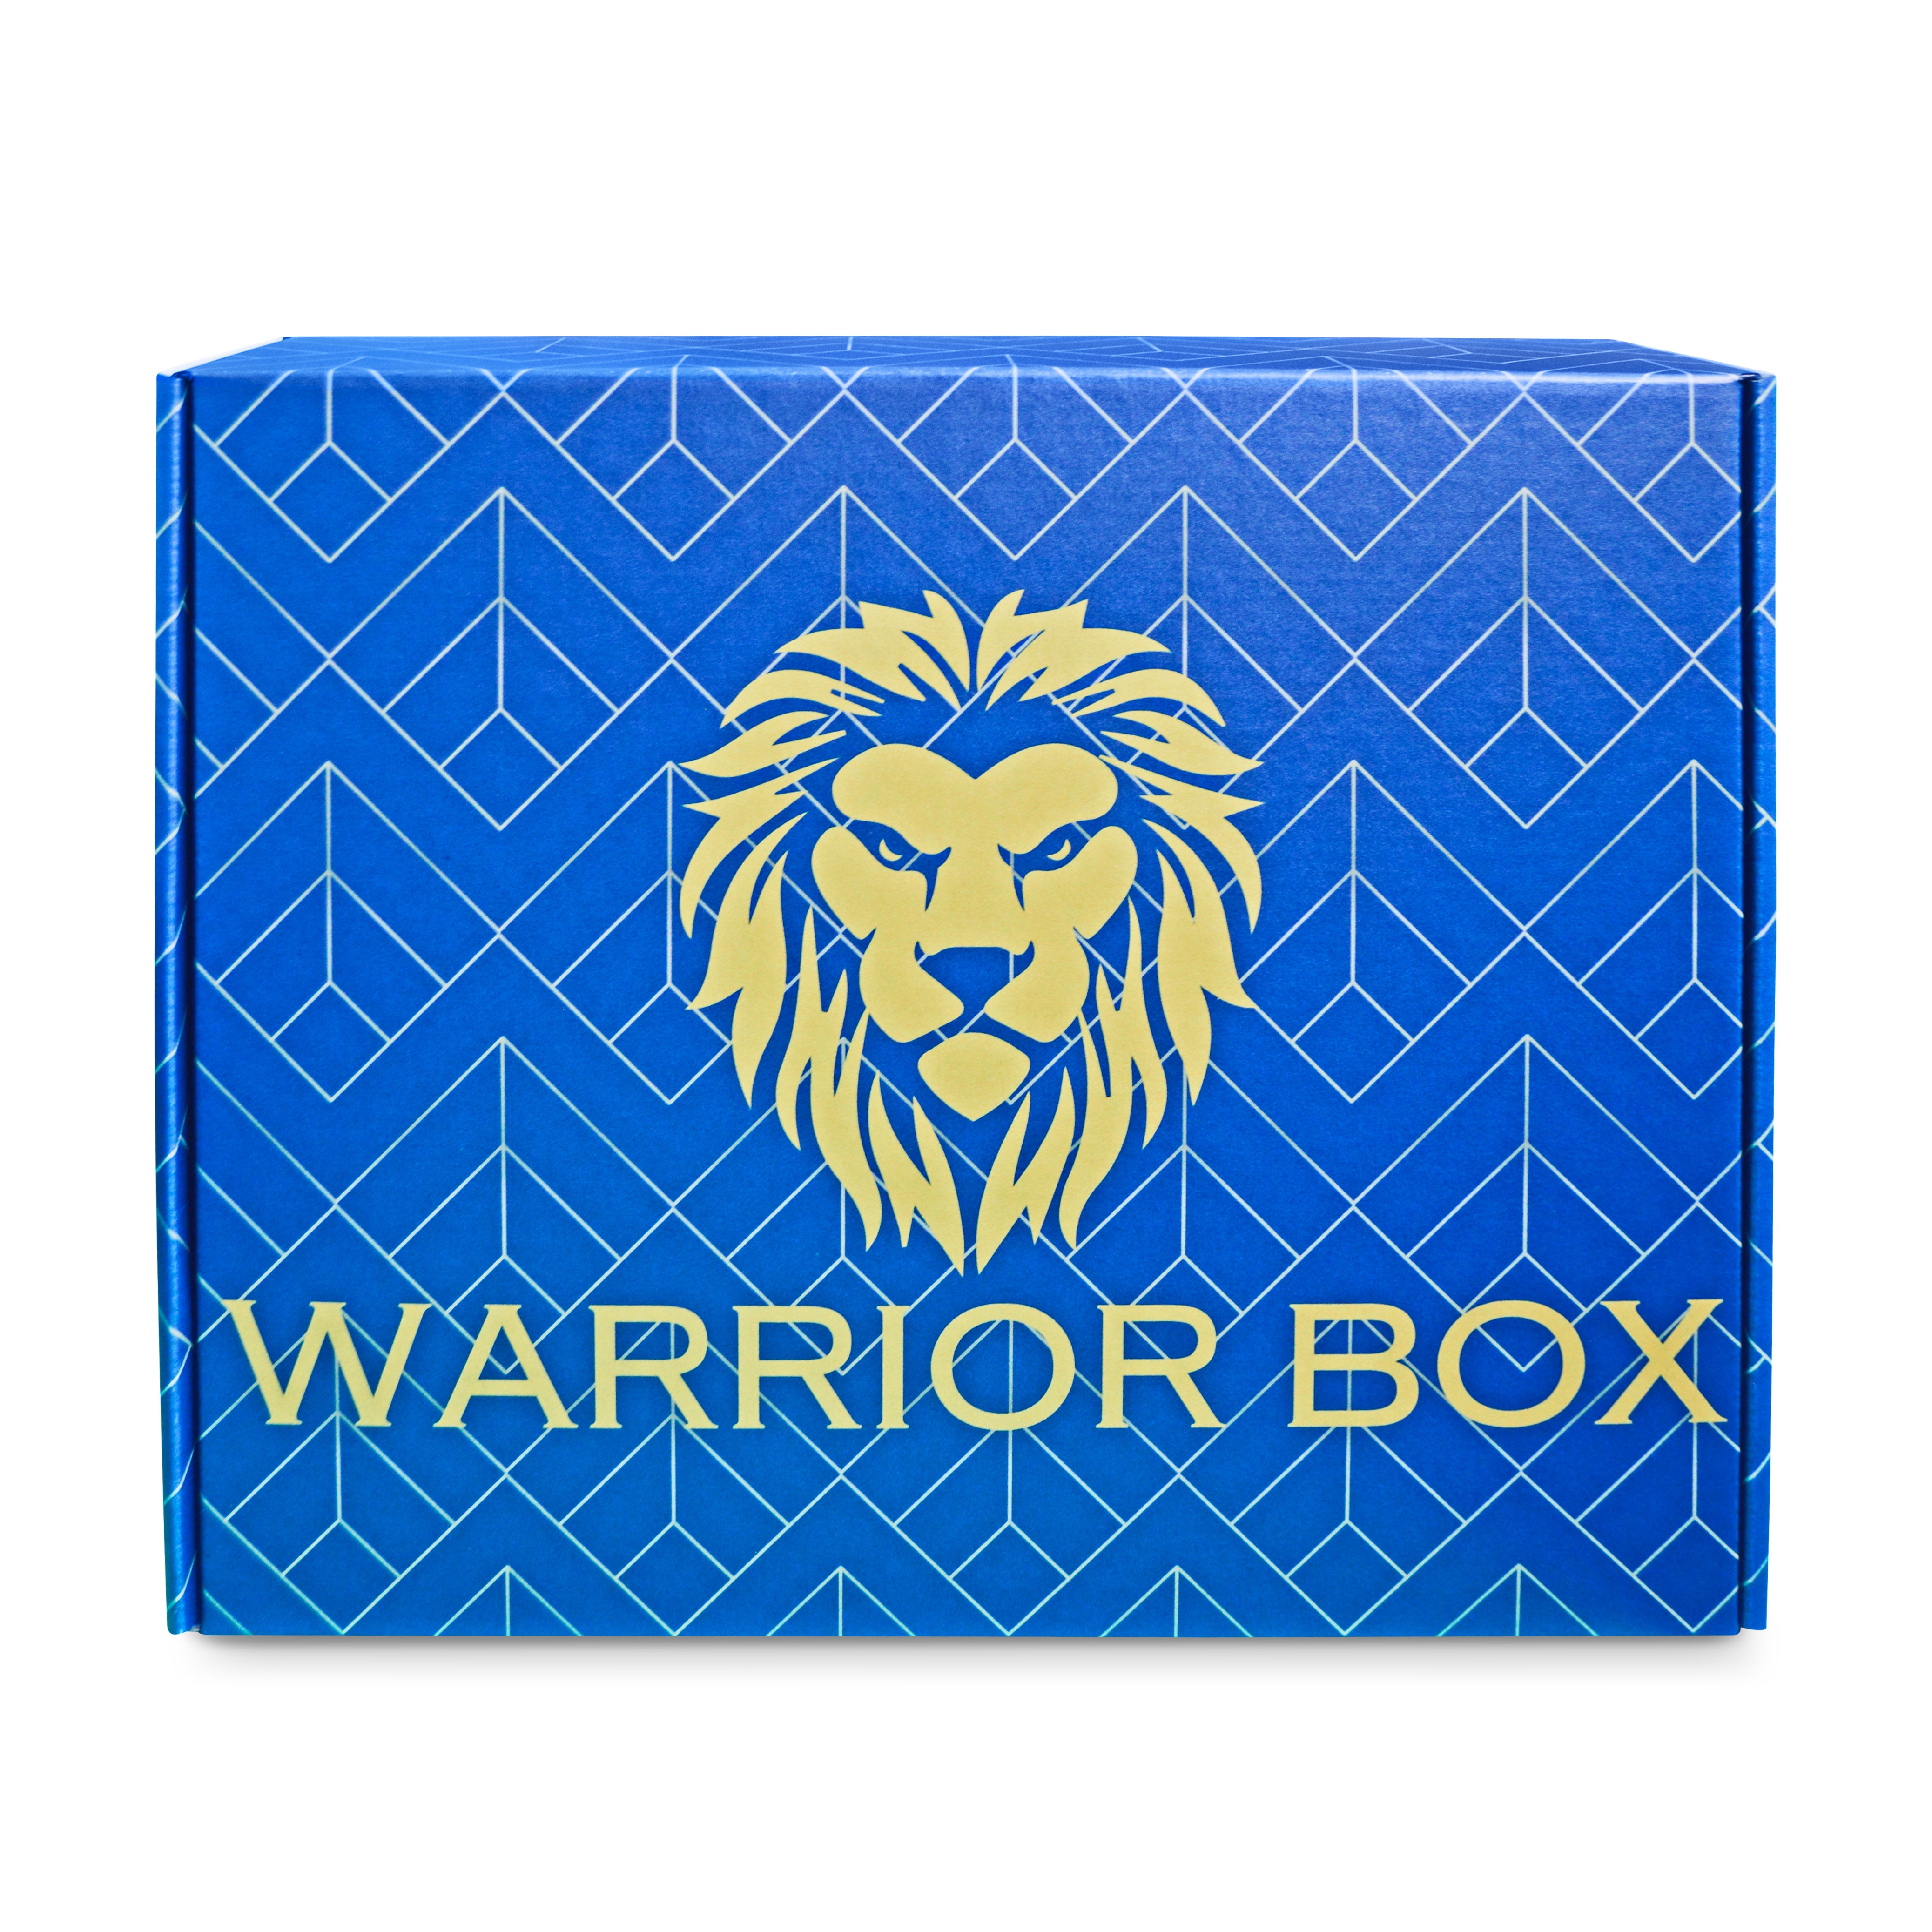 Warrior Box Addiction Recovery Package